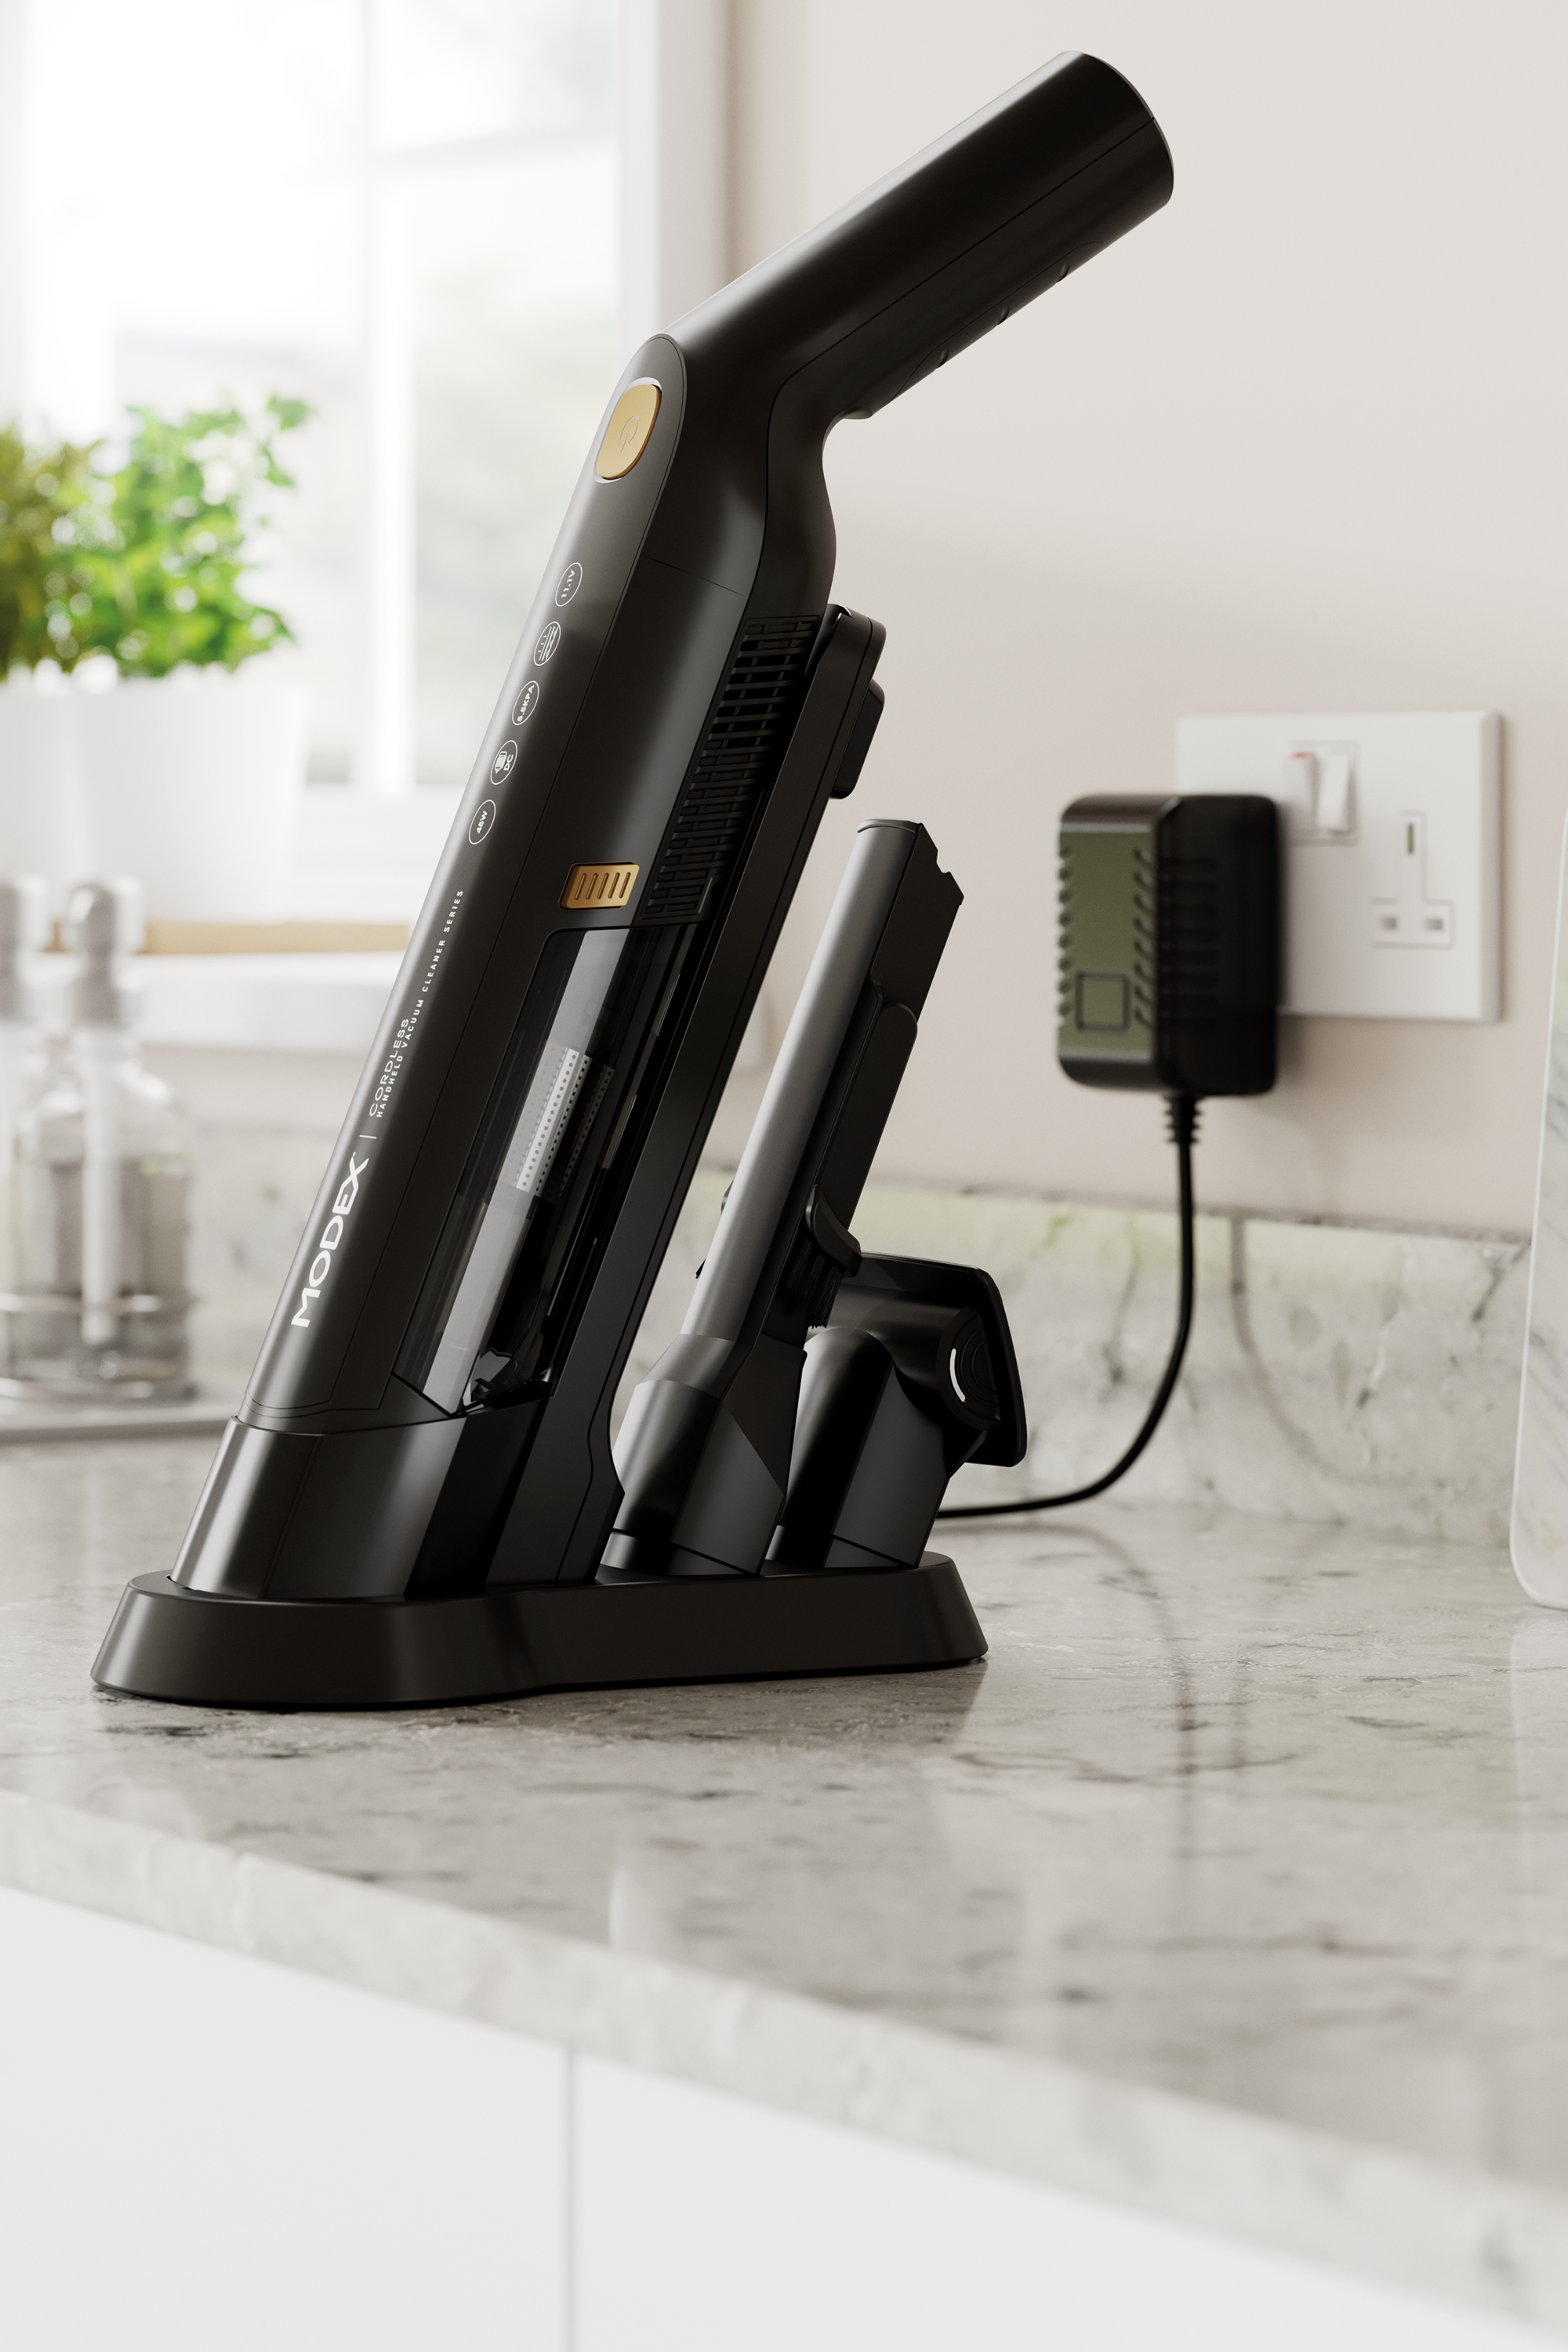 HVC1090 Handheld Chargeable Vacuum Cleaner